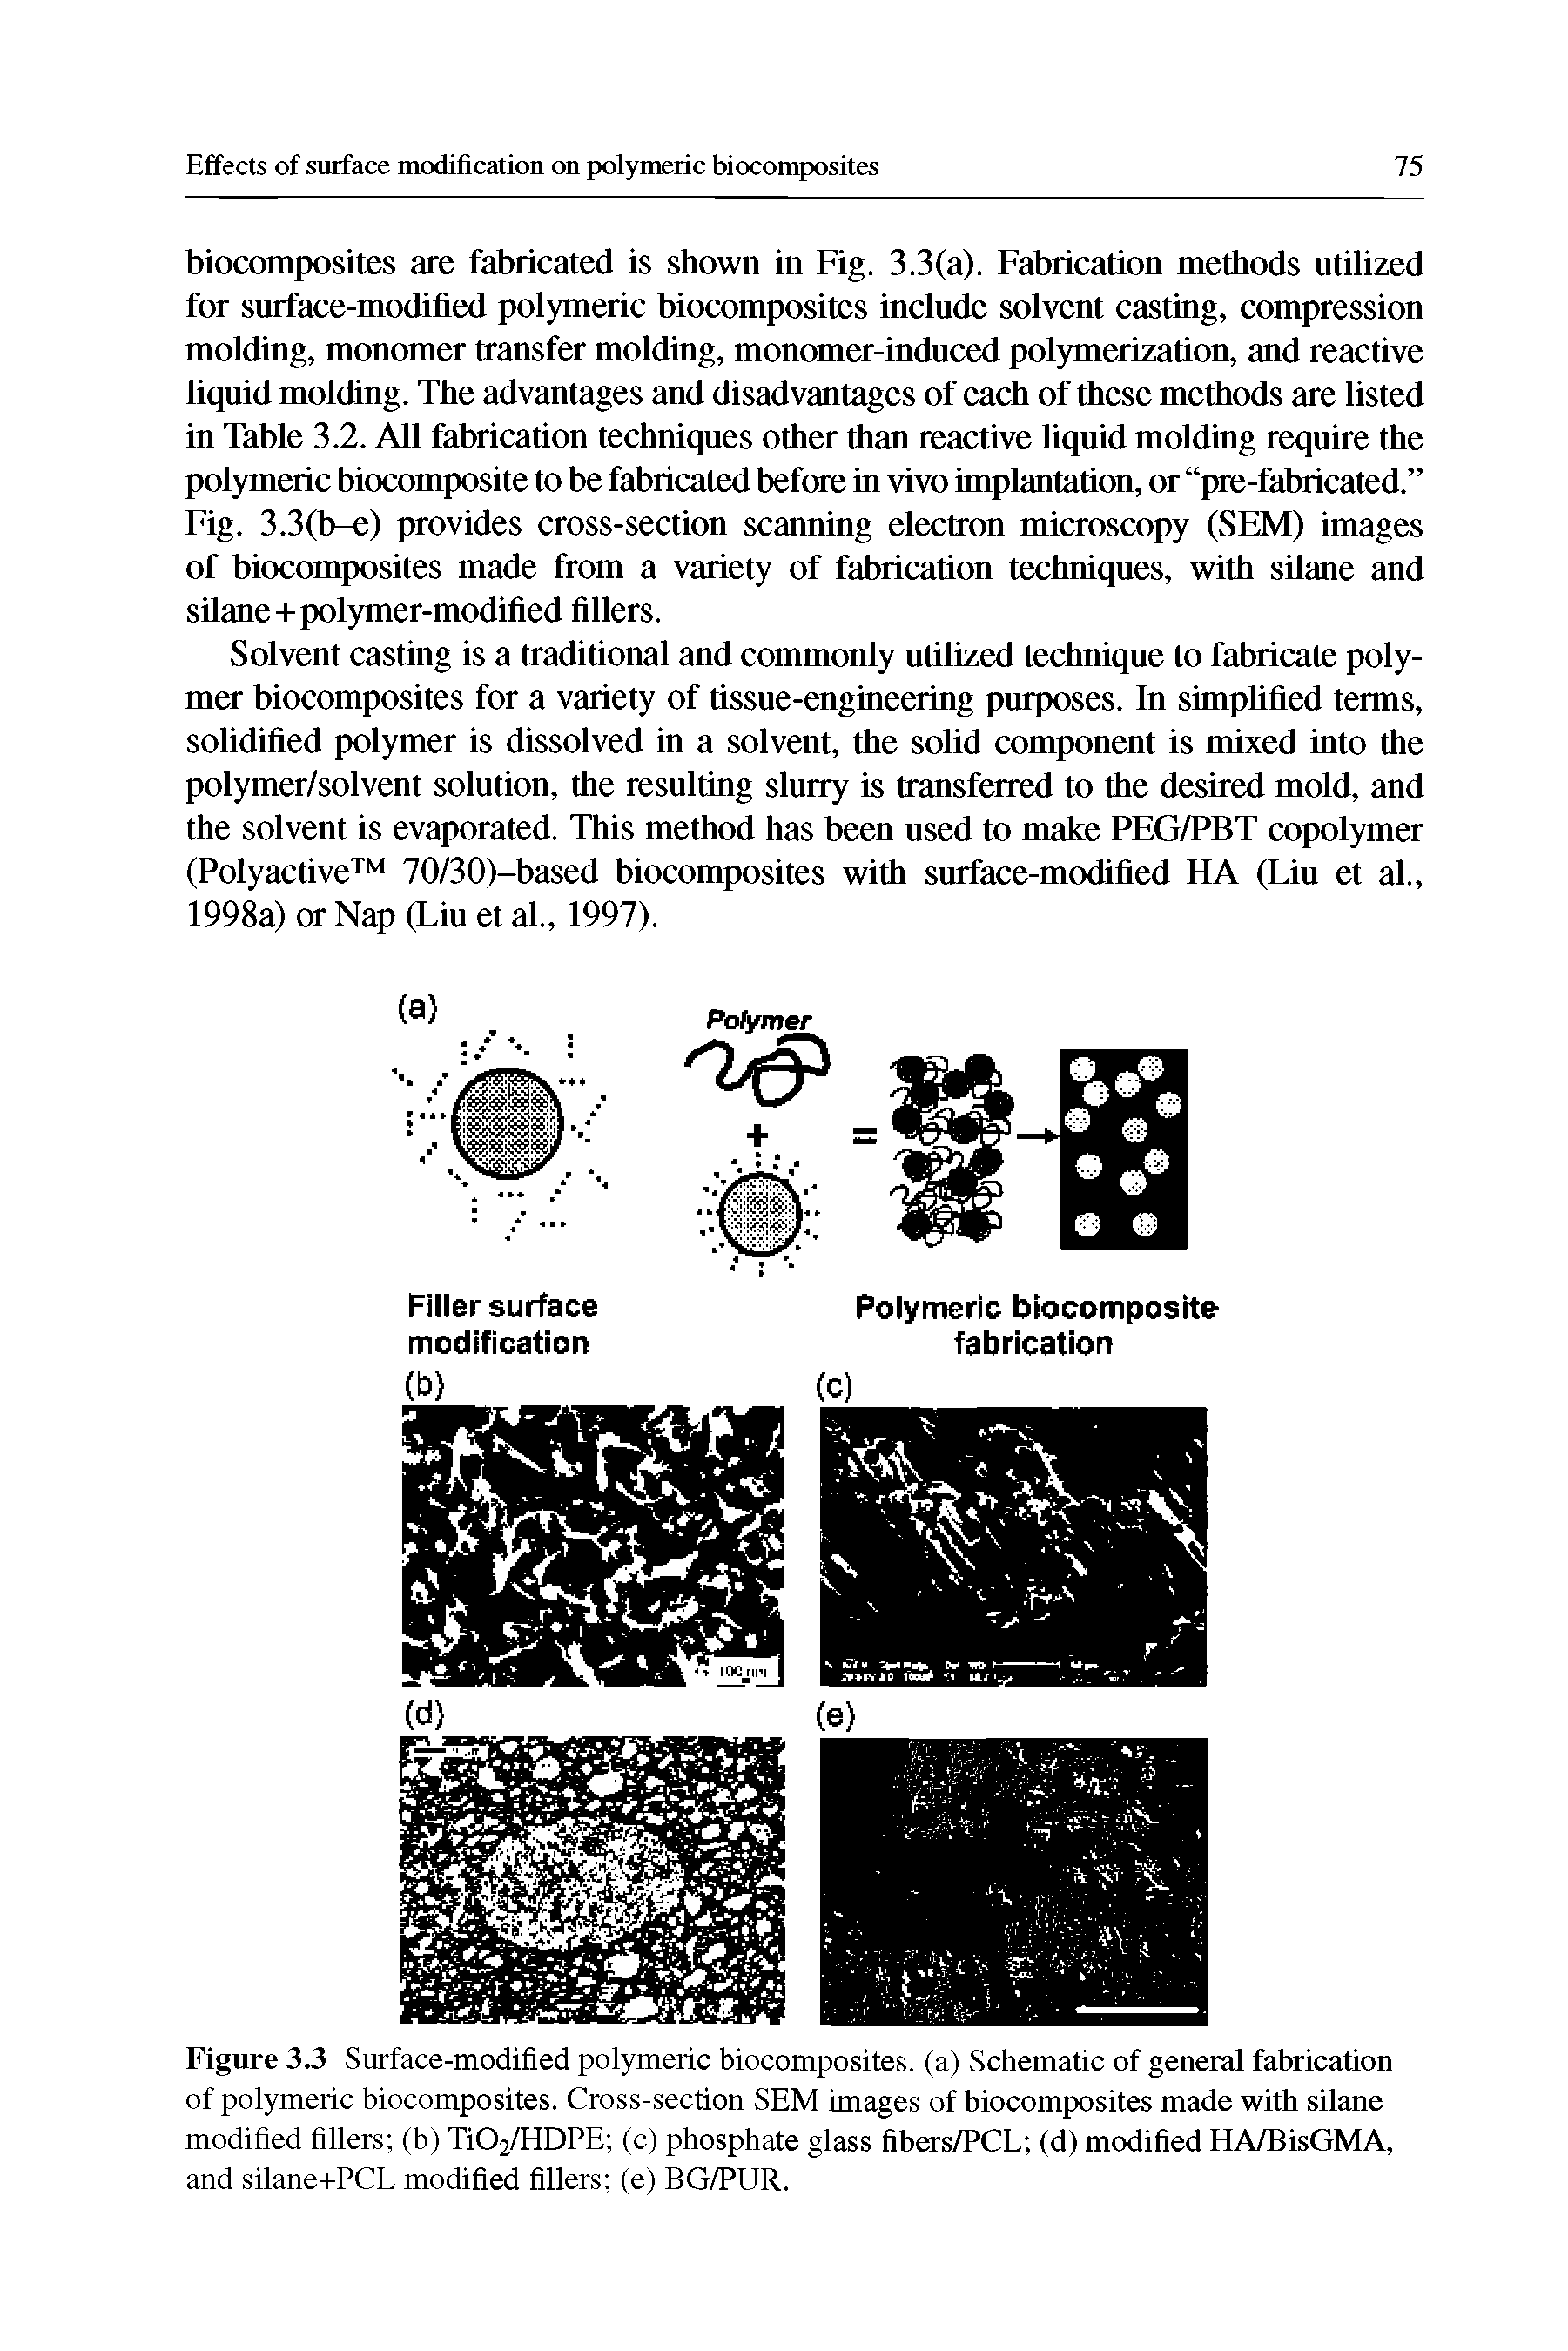 Figure 3.3 Surface-modified polymeric biocomposites, (a) Schematic of general fabrication of polymeric biocomposites. Cross-section SEM images of biocomposites made with silane modified fillers (b) Ti02/HDPE (c) phosphate glass fibers/PCL (d) modified HA/BisGMA, and silane-i-PCL modified fillers (e) BG/PUR.